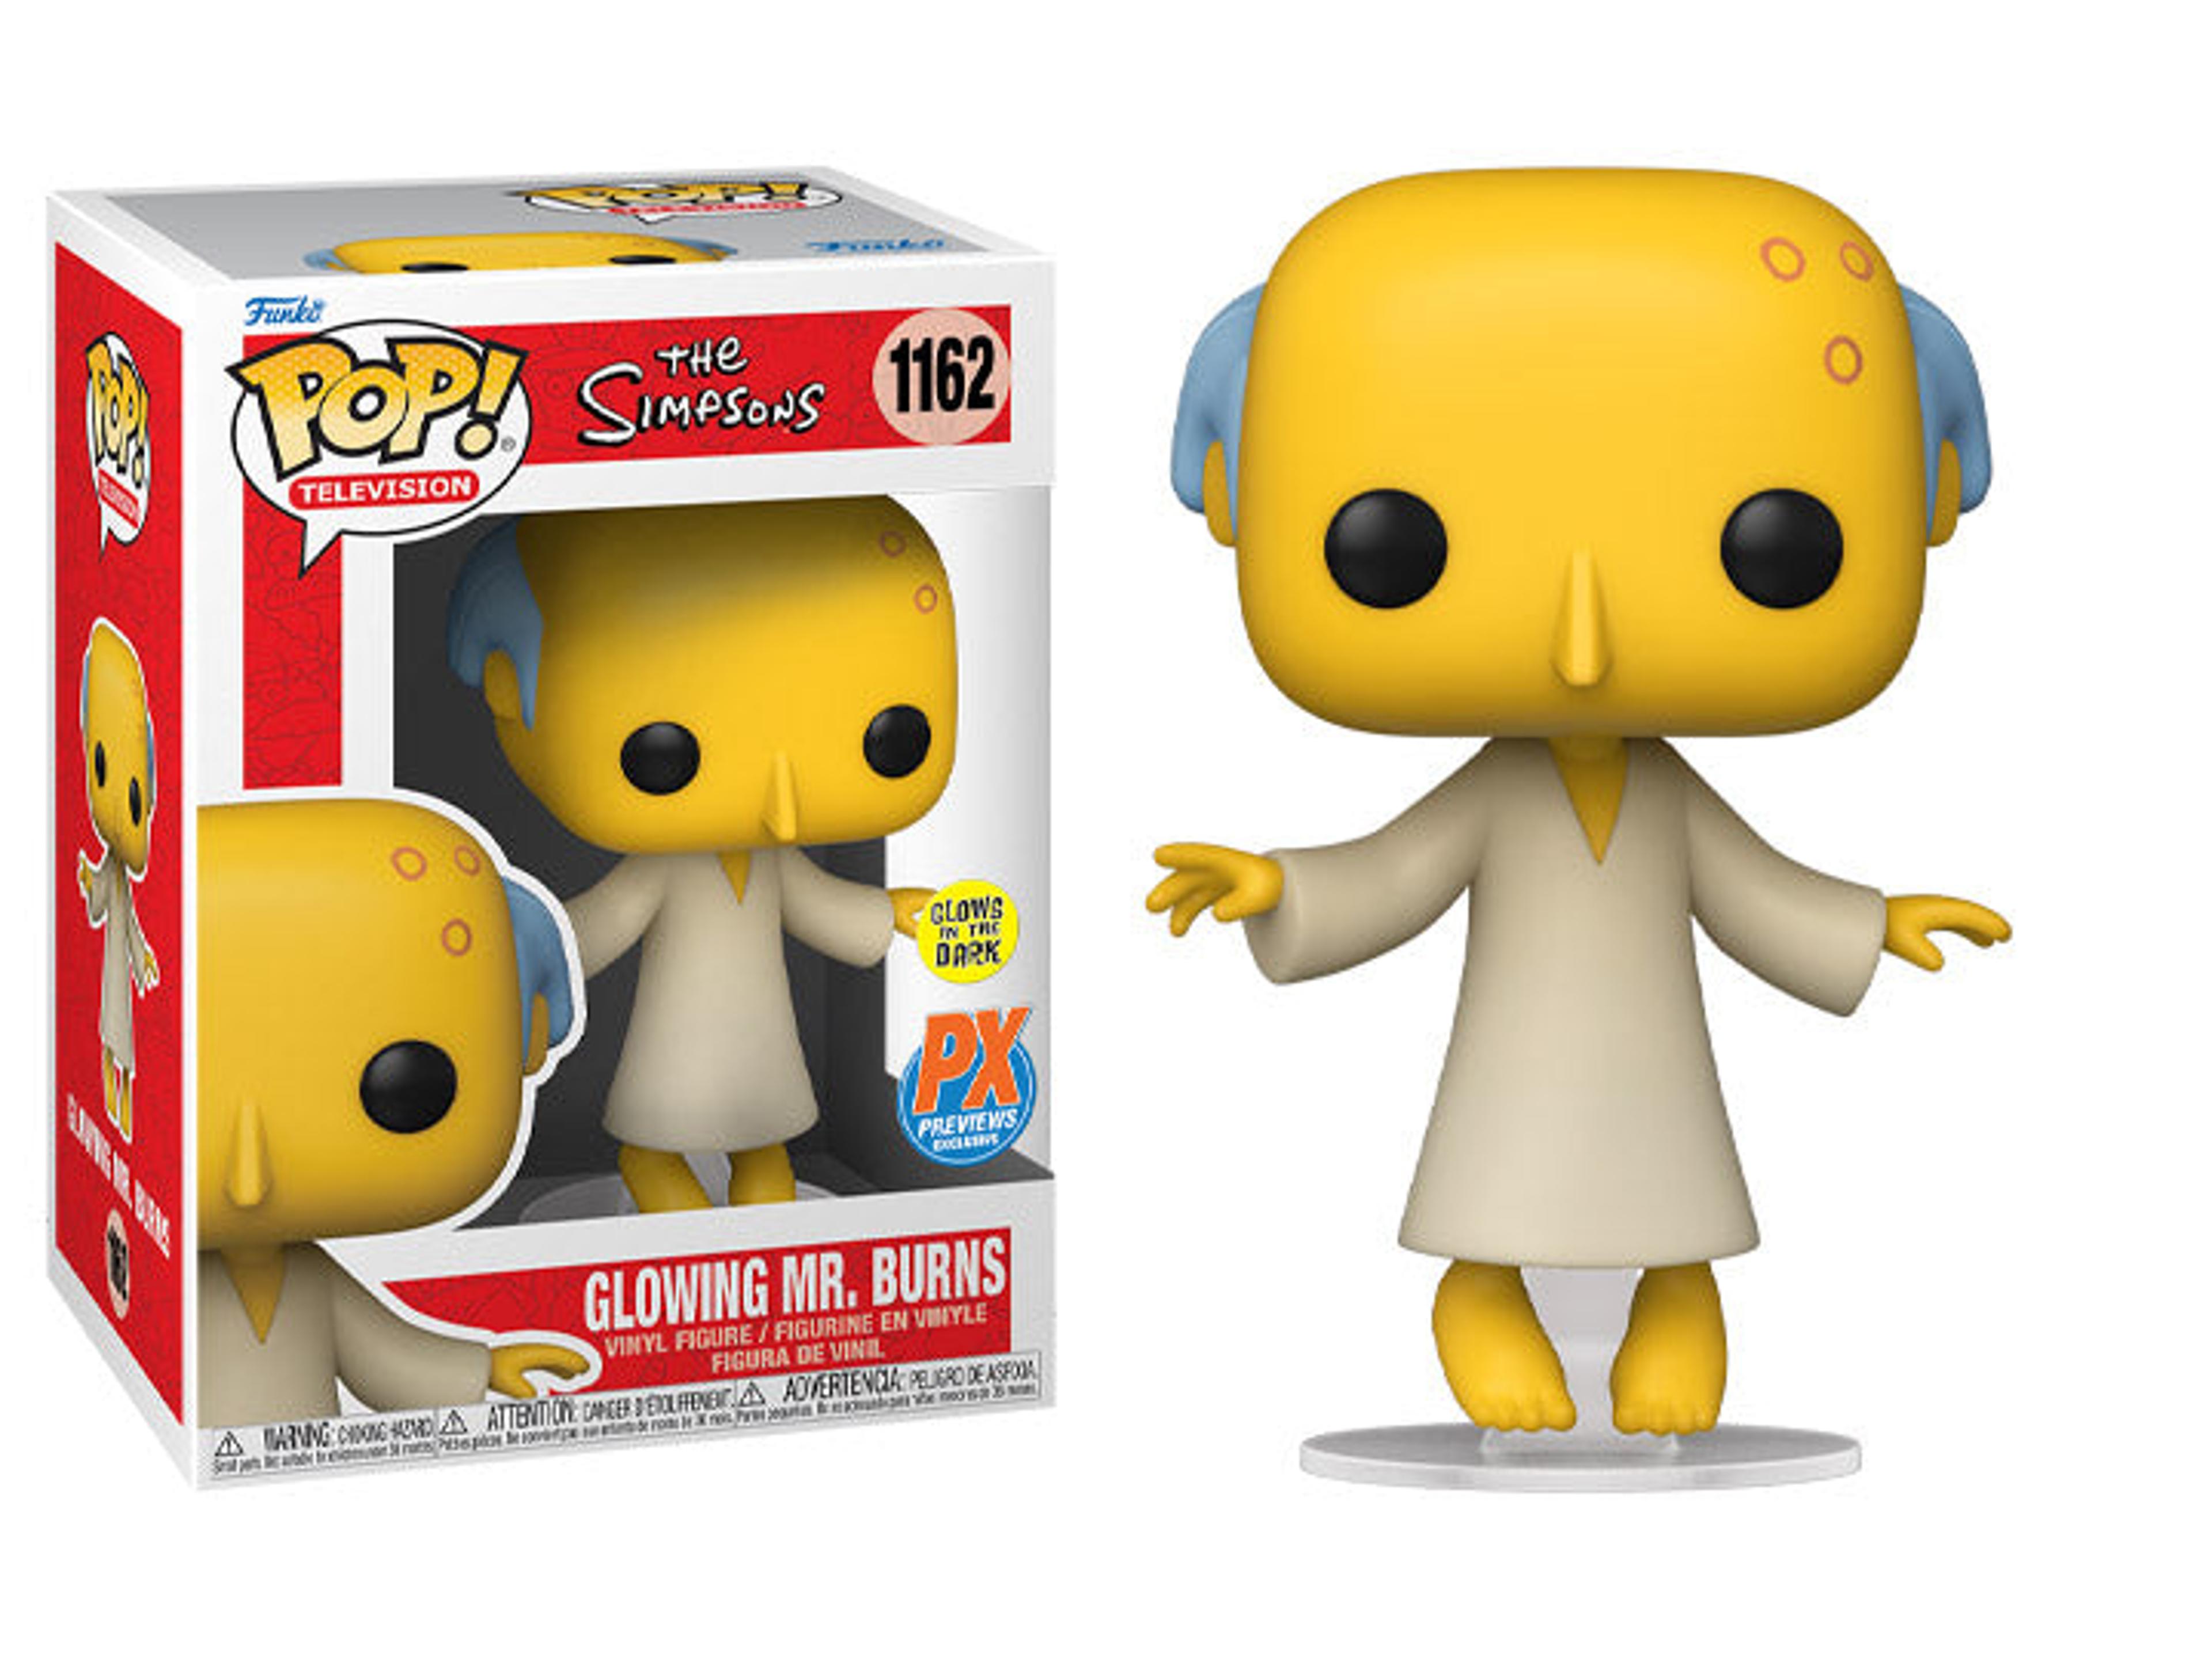 Funko Pop! The Simpsons Mr. Burns Glow In The Dark PX Previews E